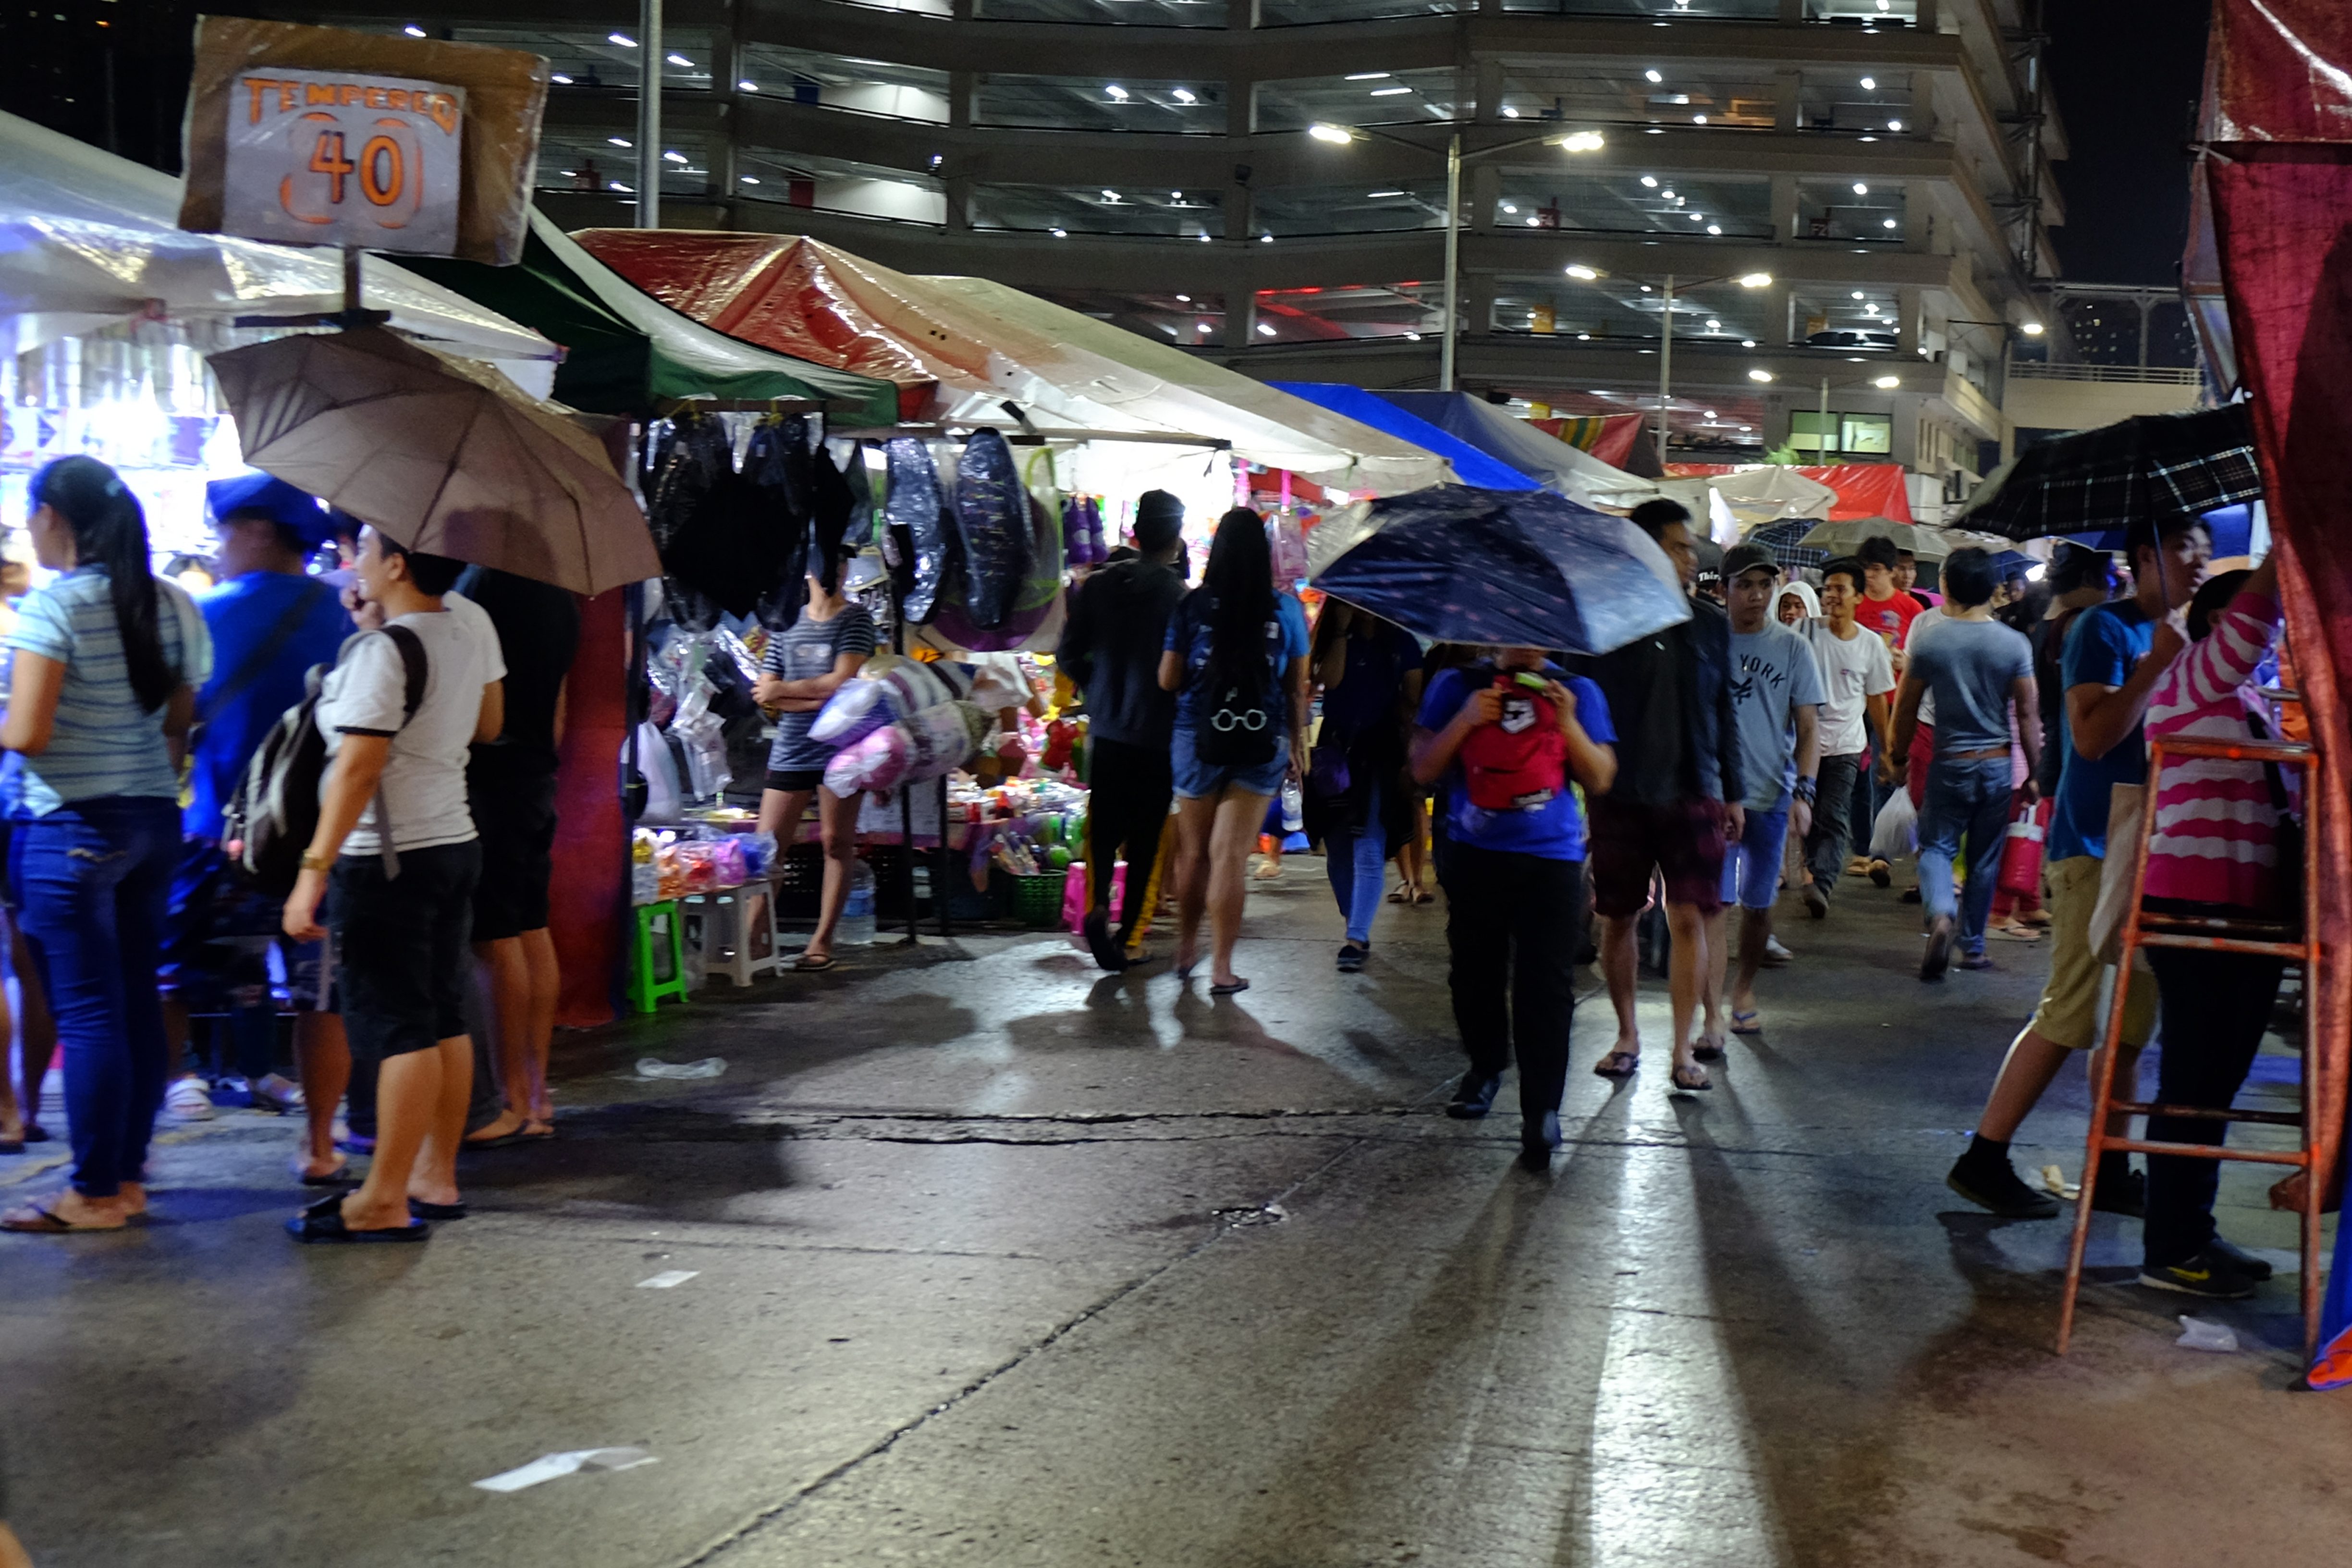 NIGHT SHOPPING. A night market is near the Tutuban Shopping Mall for shoppers who want to escape the heat.  